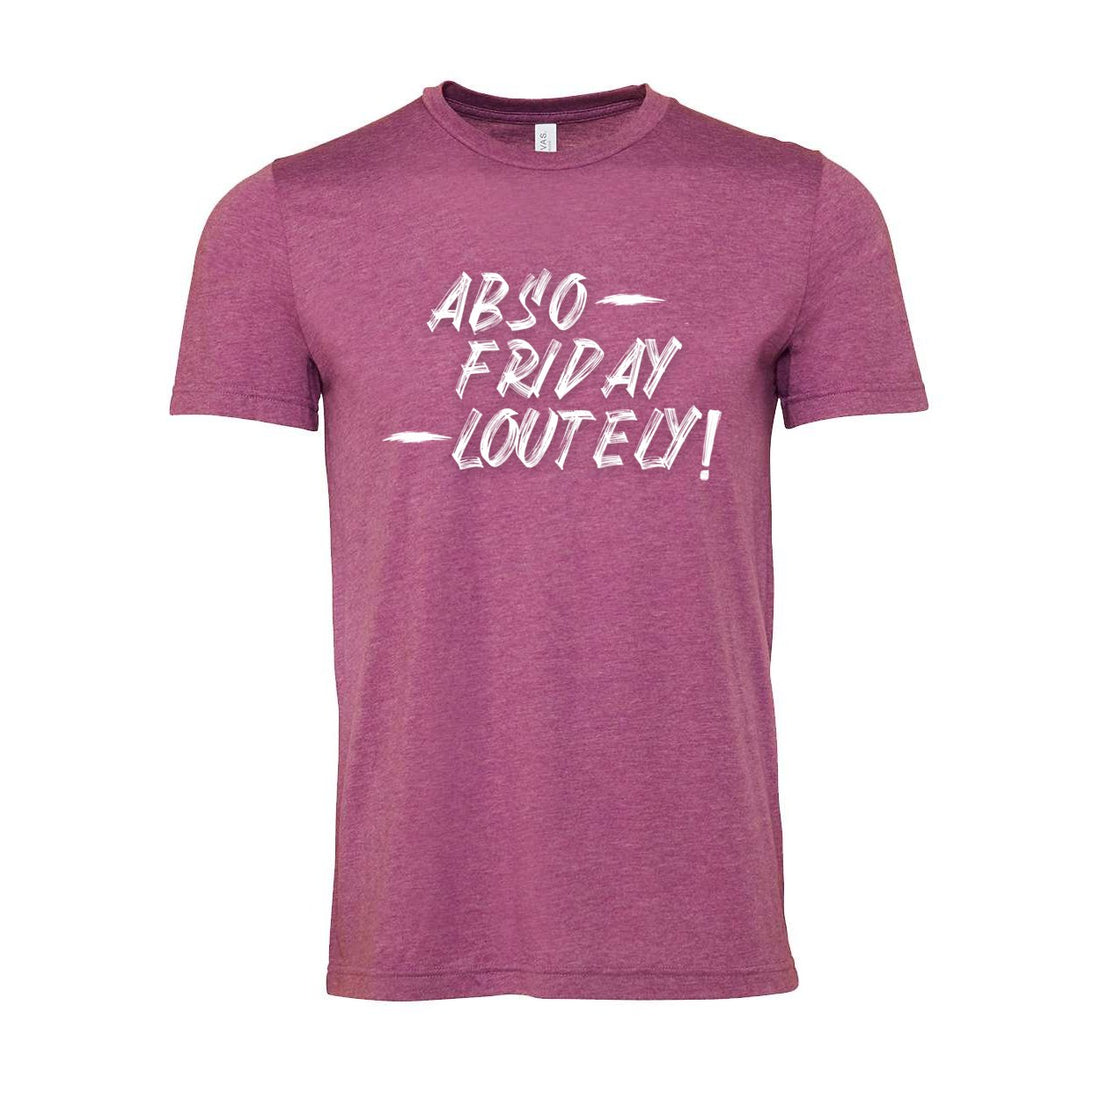 Abso-Friday Short Sleeve Jersey Tee - T-Shirts - Positively Sassy - Abso-Friday Short Sleeve Jersey Tee